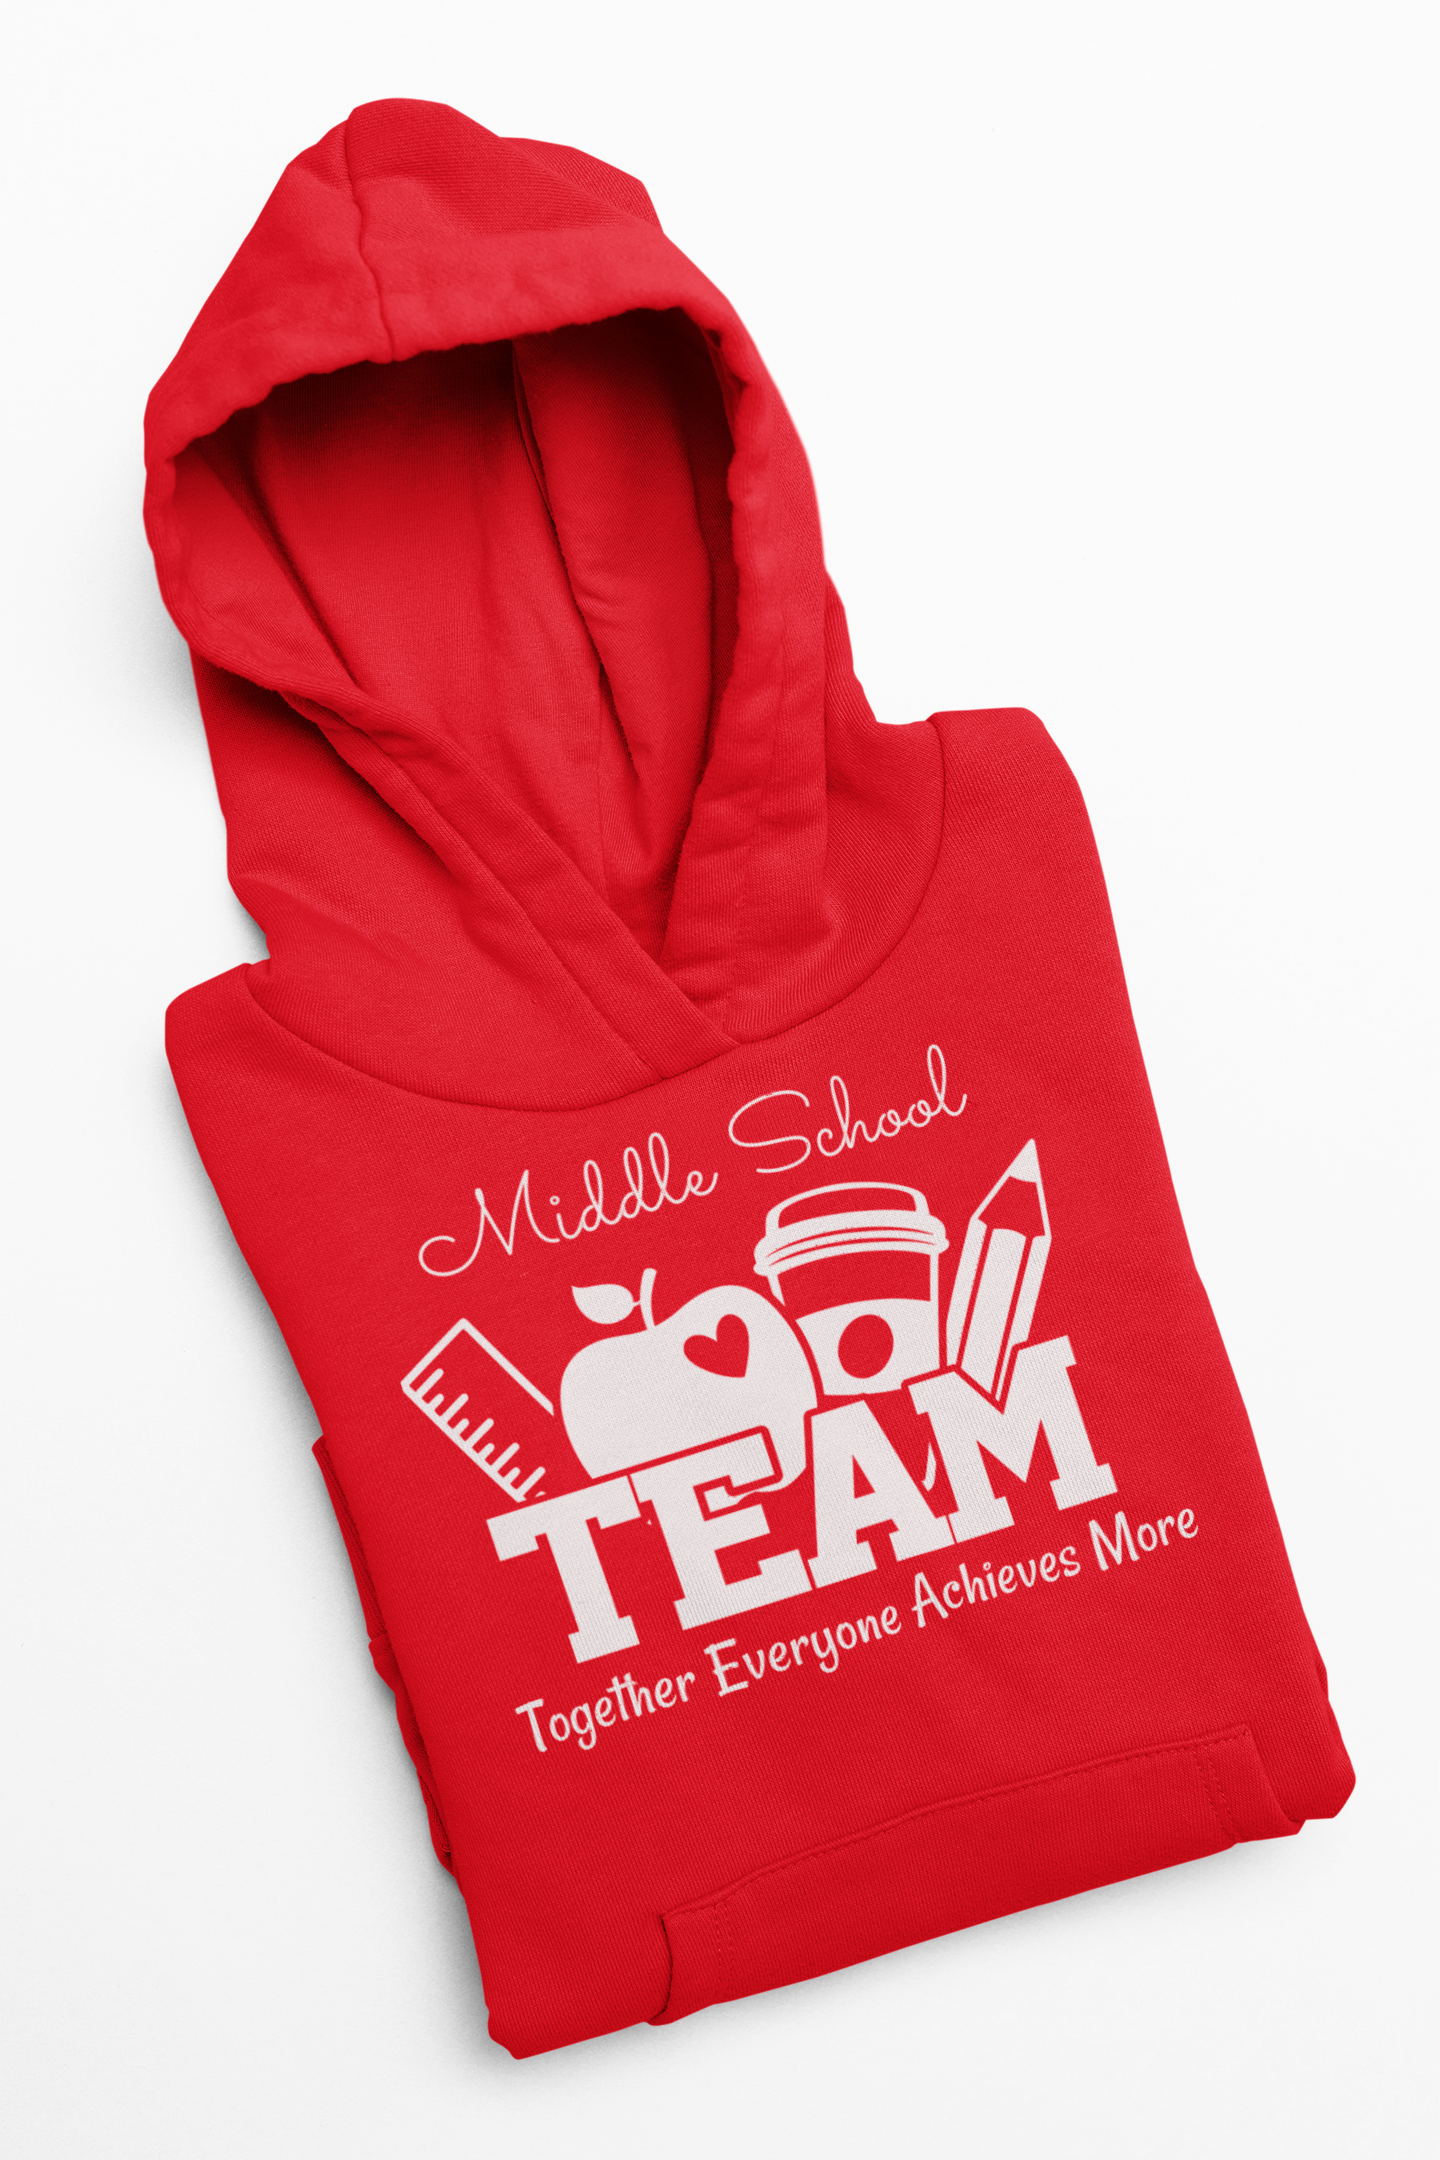 Grade Together Everyone Achieves More Graphic Hoodie